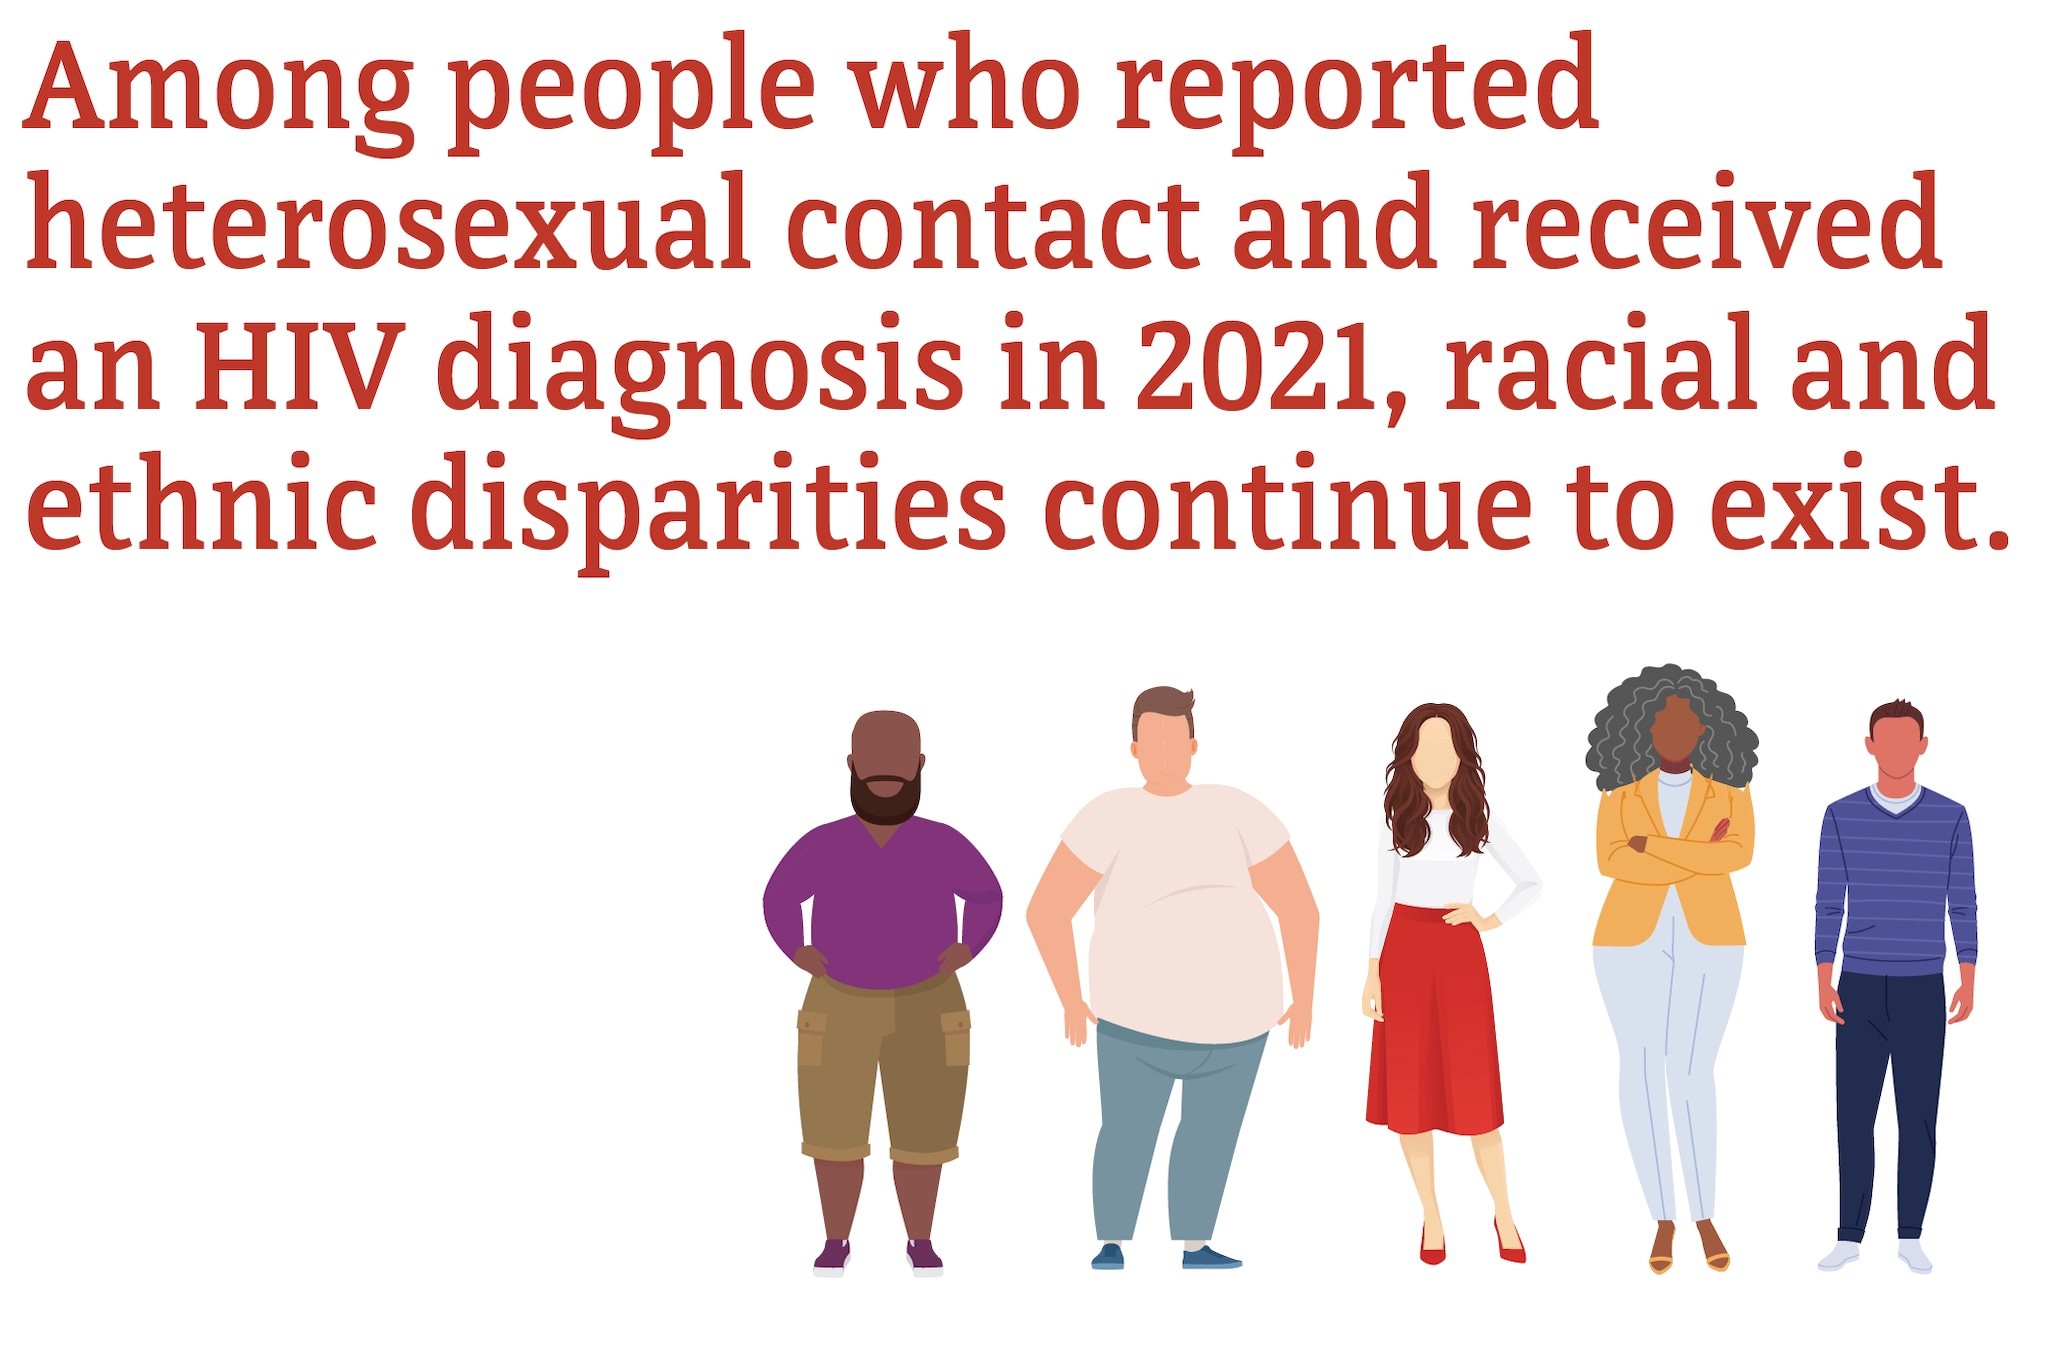 Among people who reported heterosexual contact and received an HIV diagnosis, racial and ethnic disparities continue to exist.